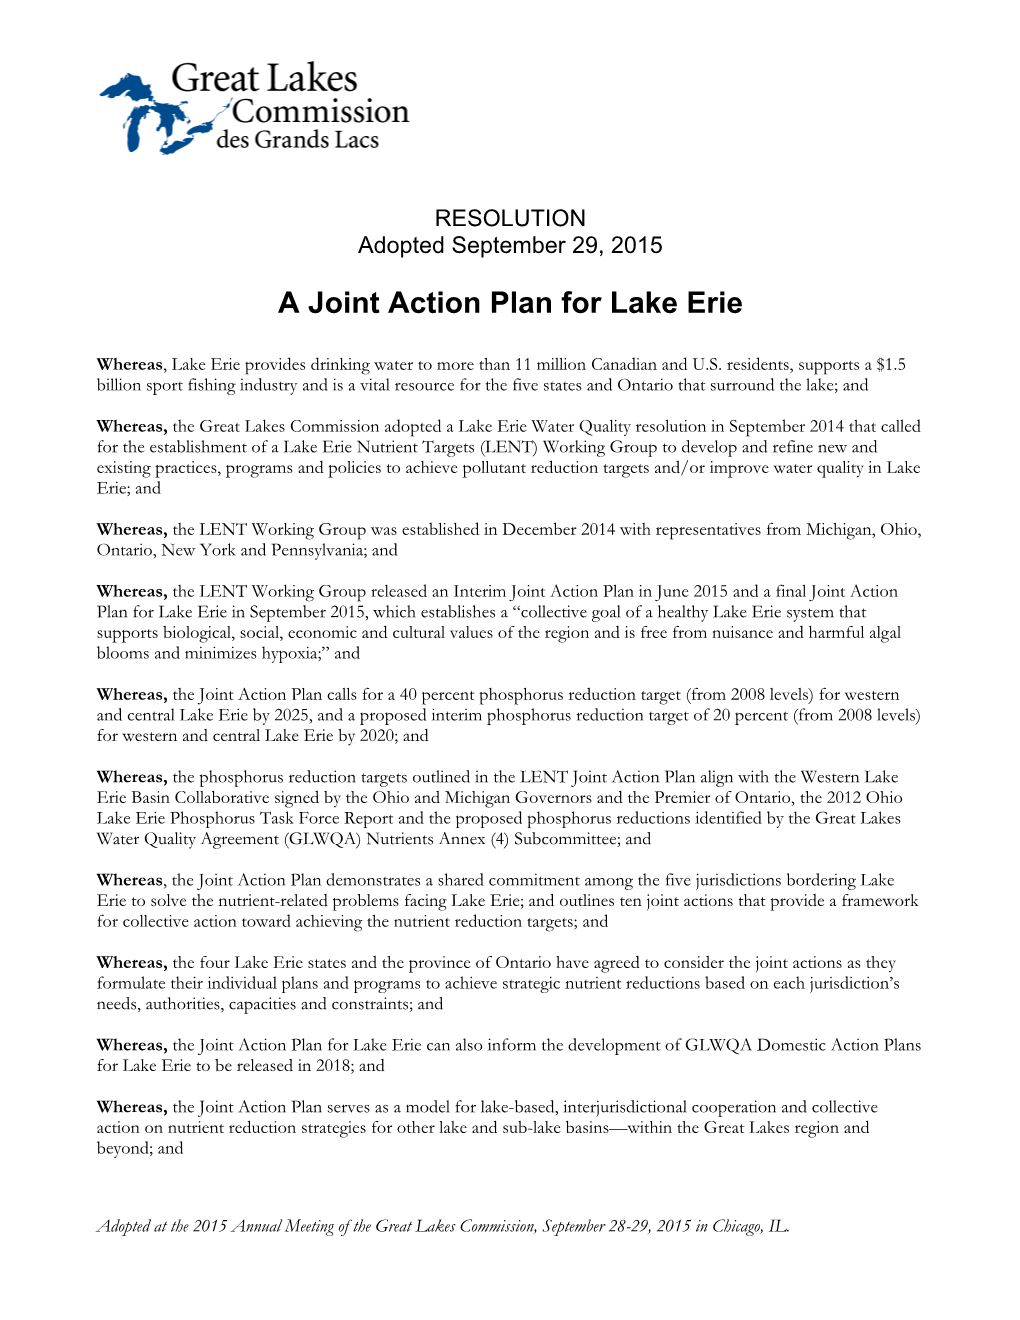 A Joint Action Plan for Lake Erie